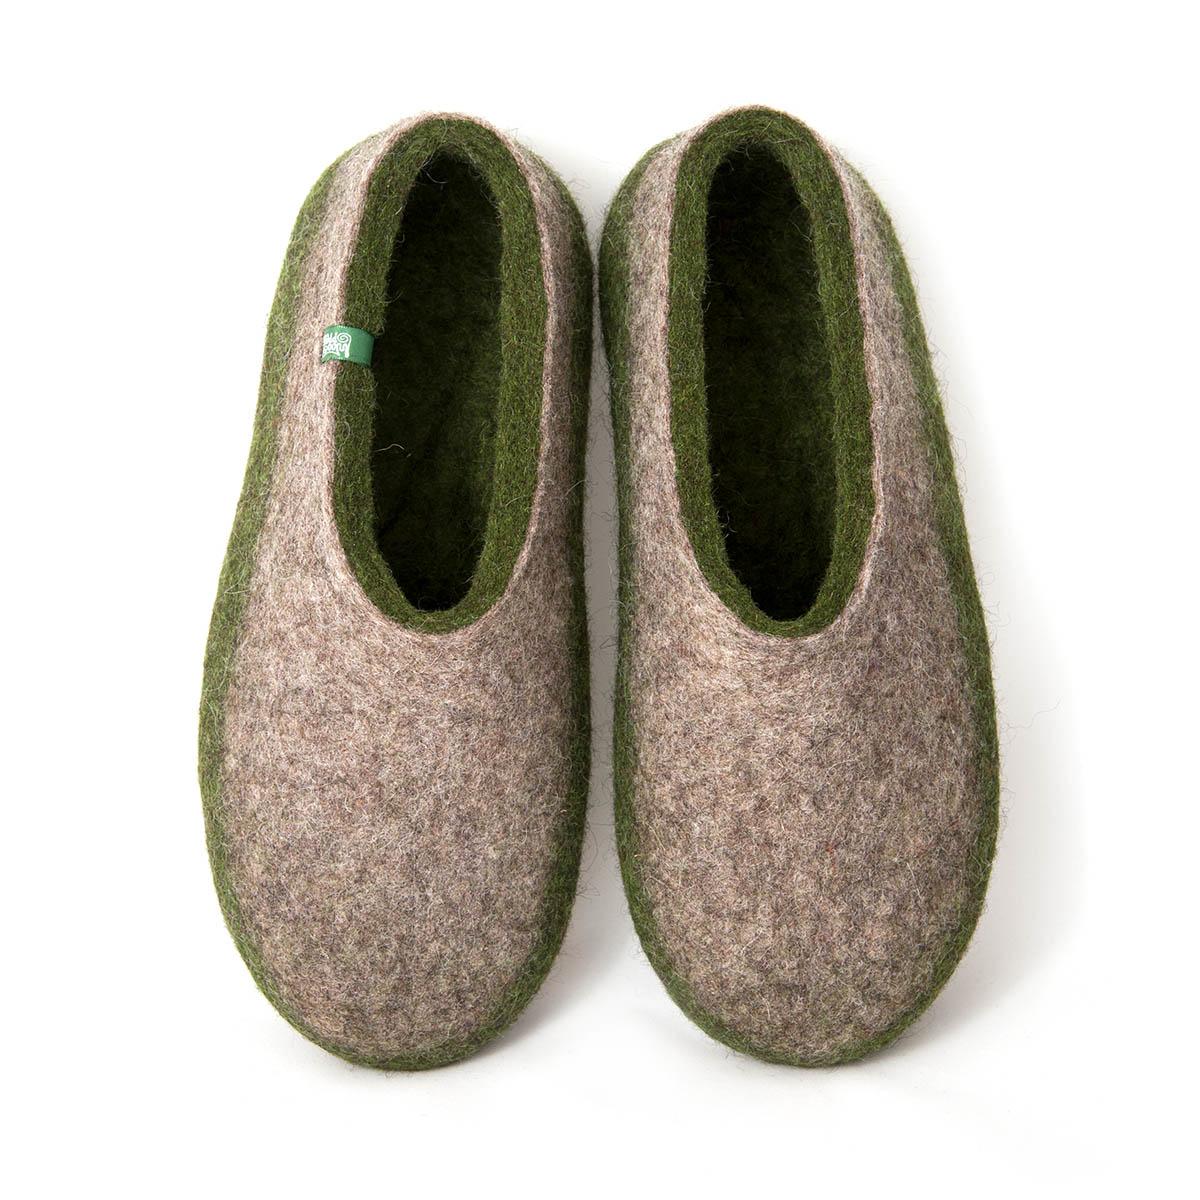 Natural shoes GAIA green unisex by Wooppers -a